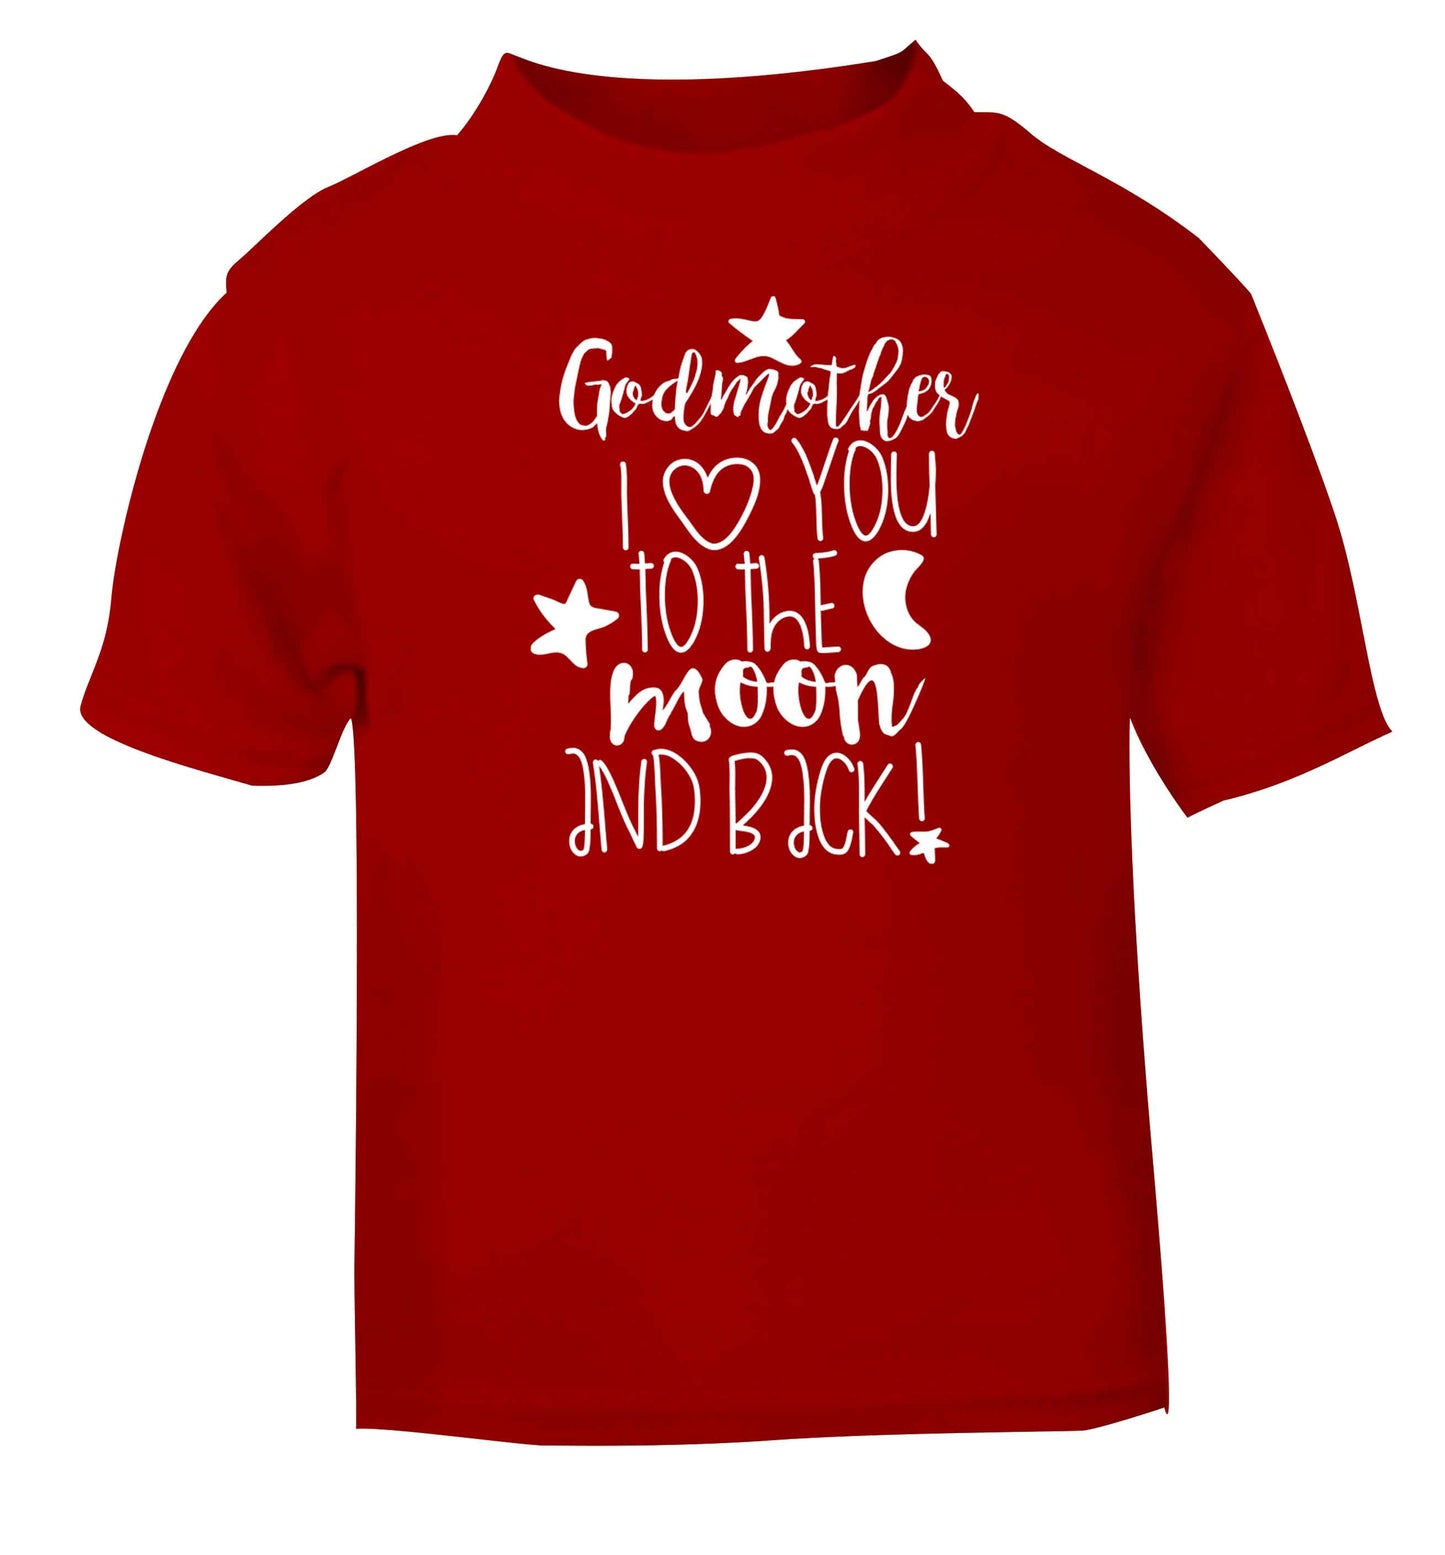 Godmother I love you to the moon and back red baby toddler Tshirt 2 Years